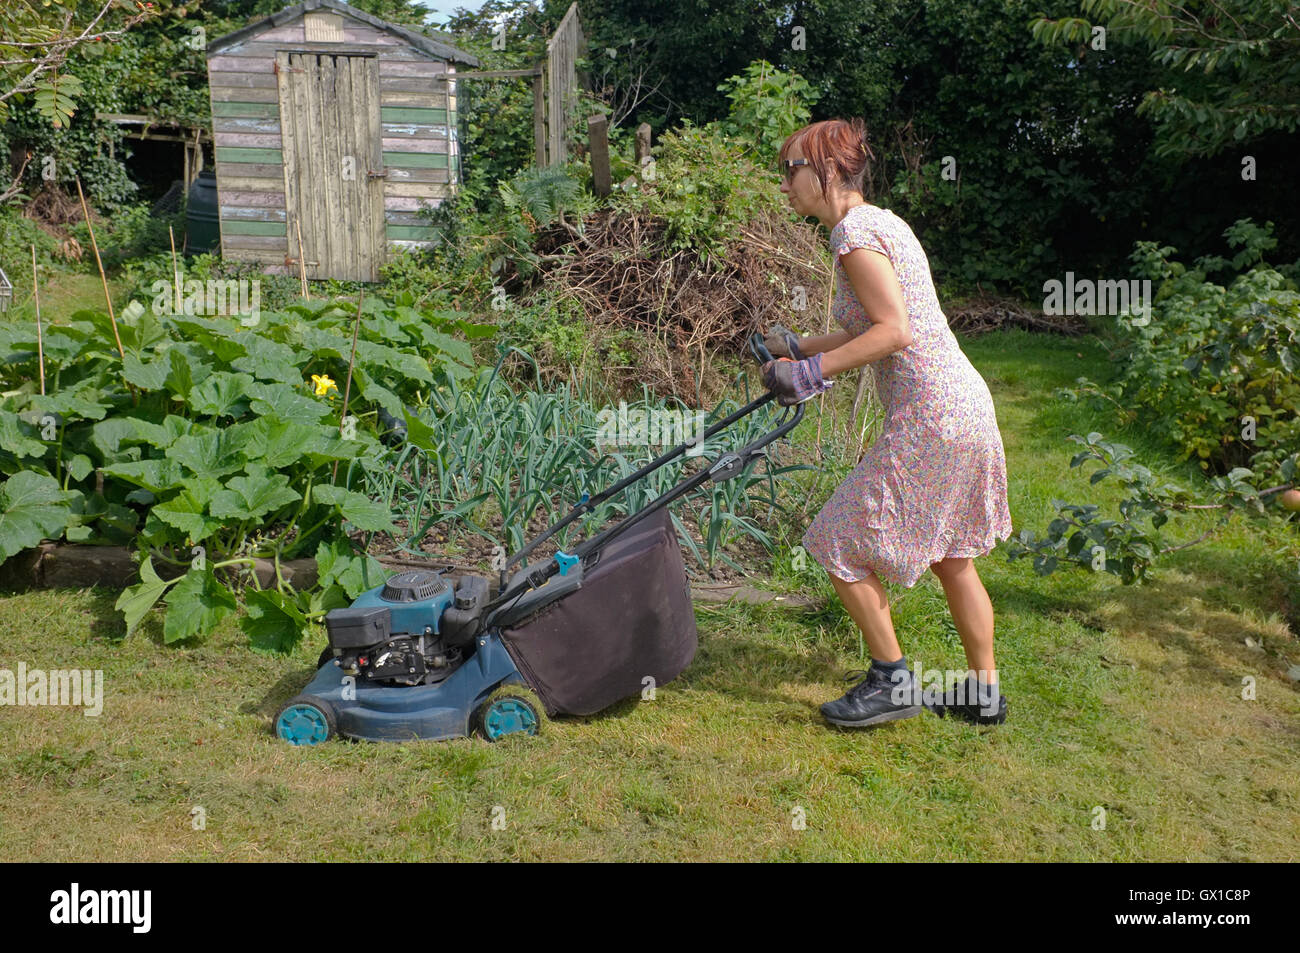 A woman mowing the lawn Stock Photo